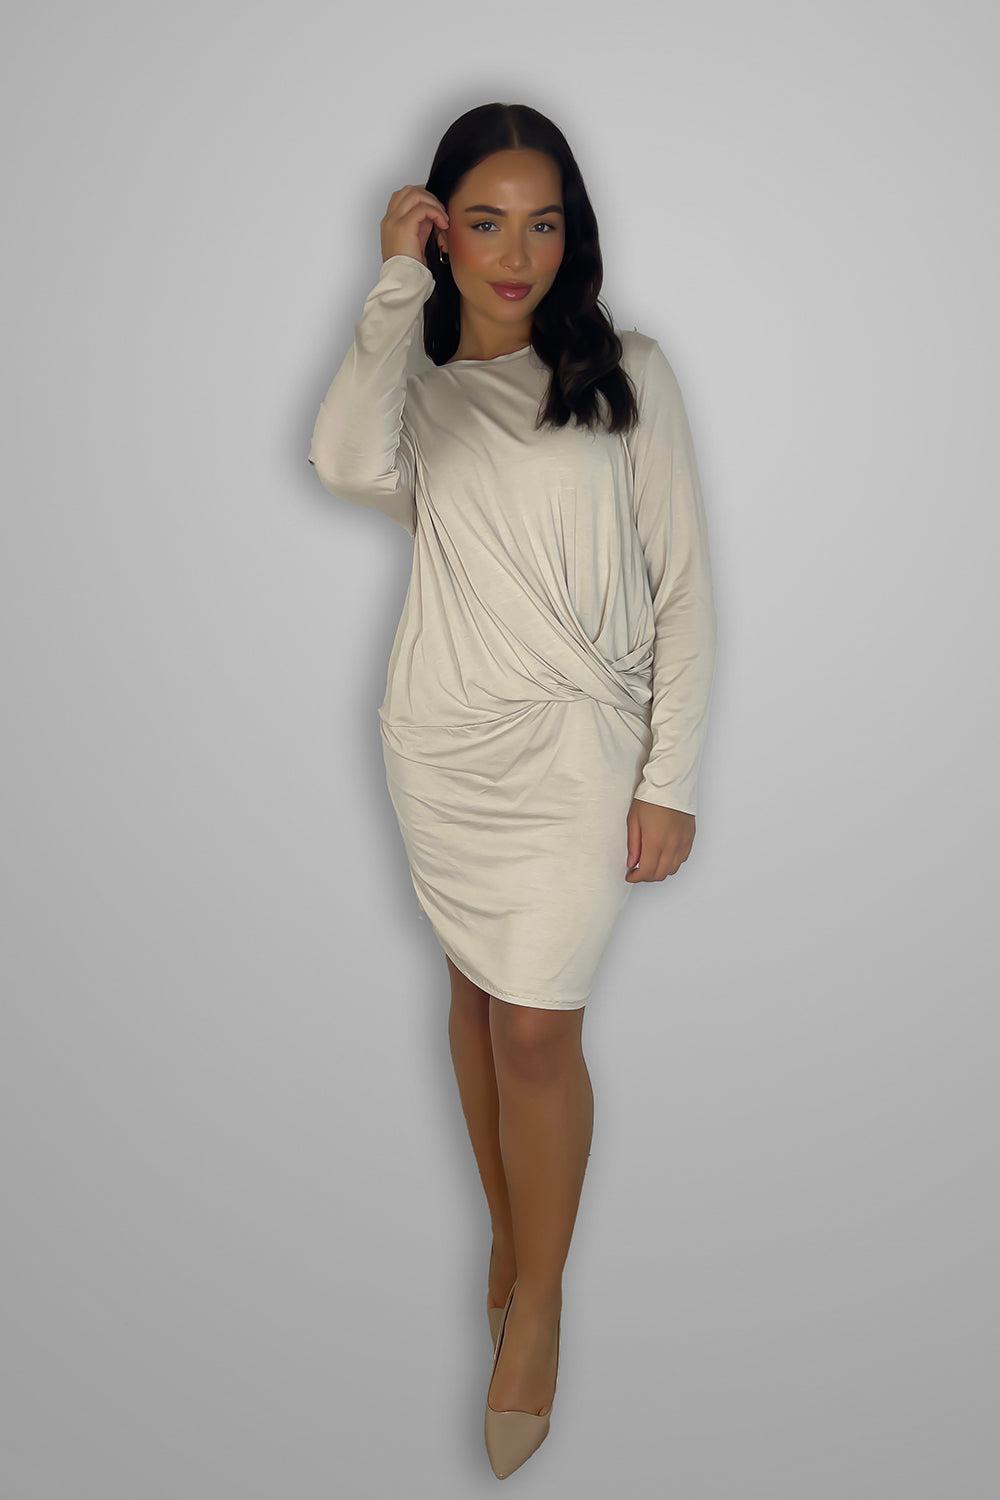 Twisted to Side Lightweight Jersey Dress